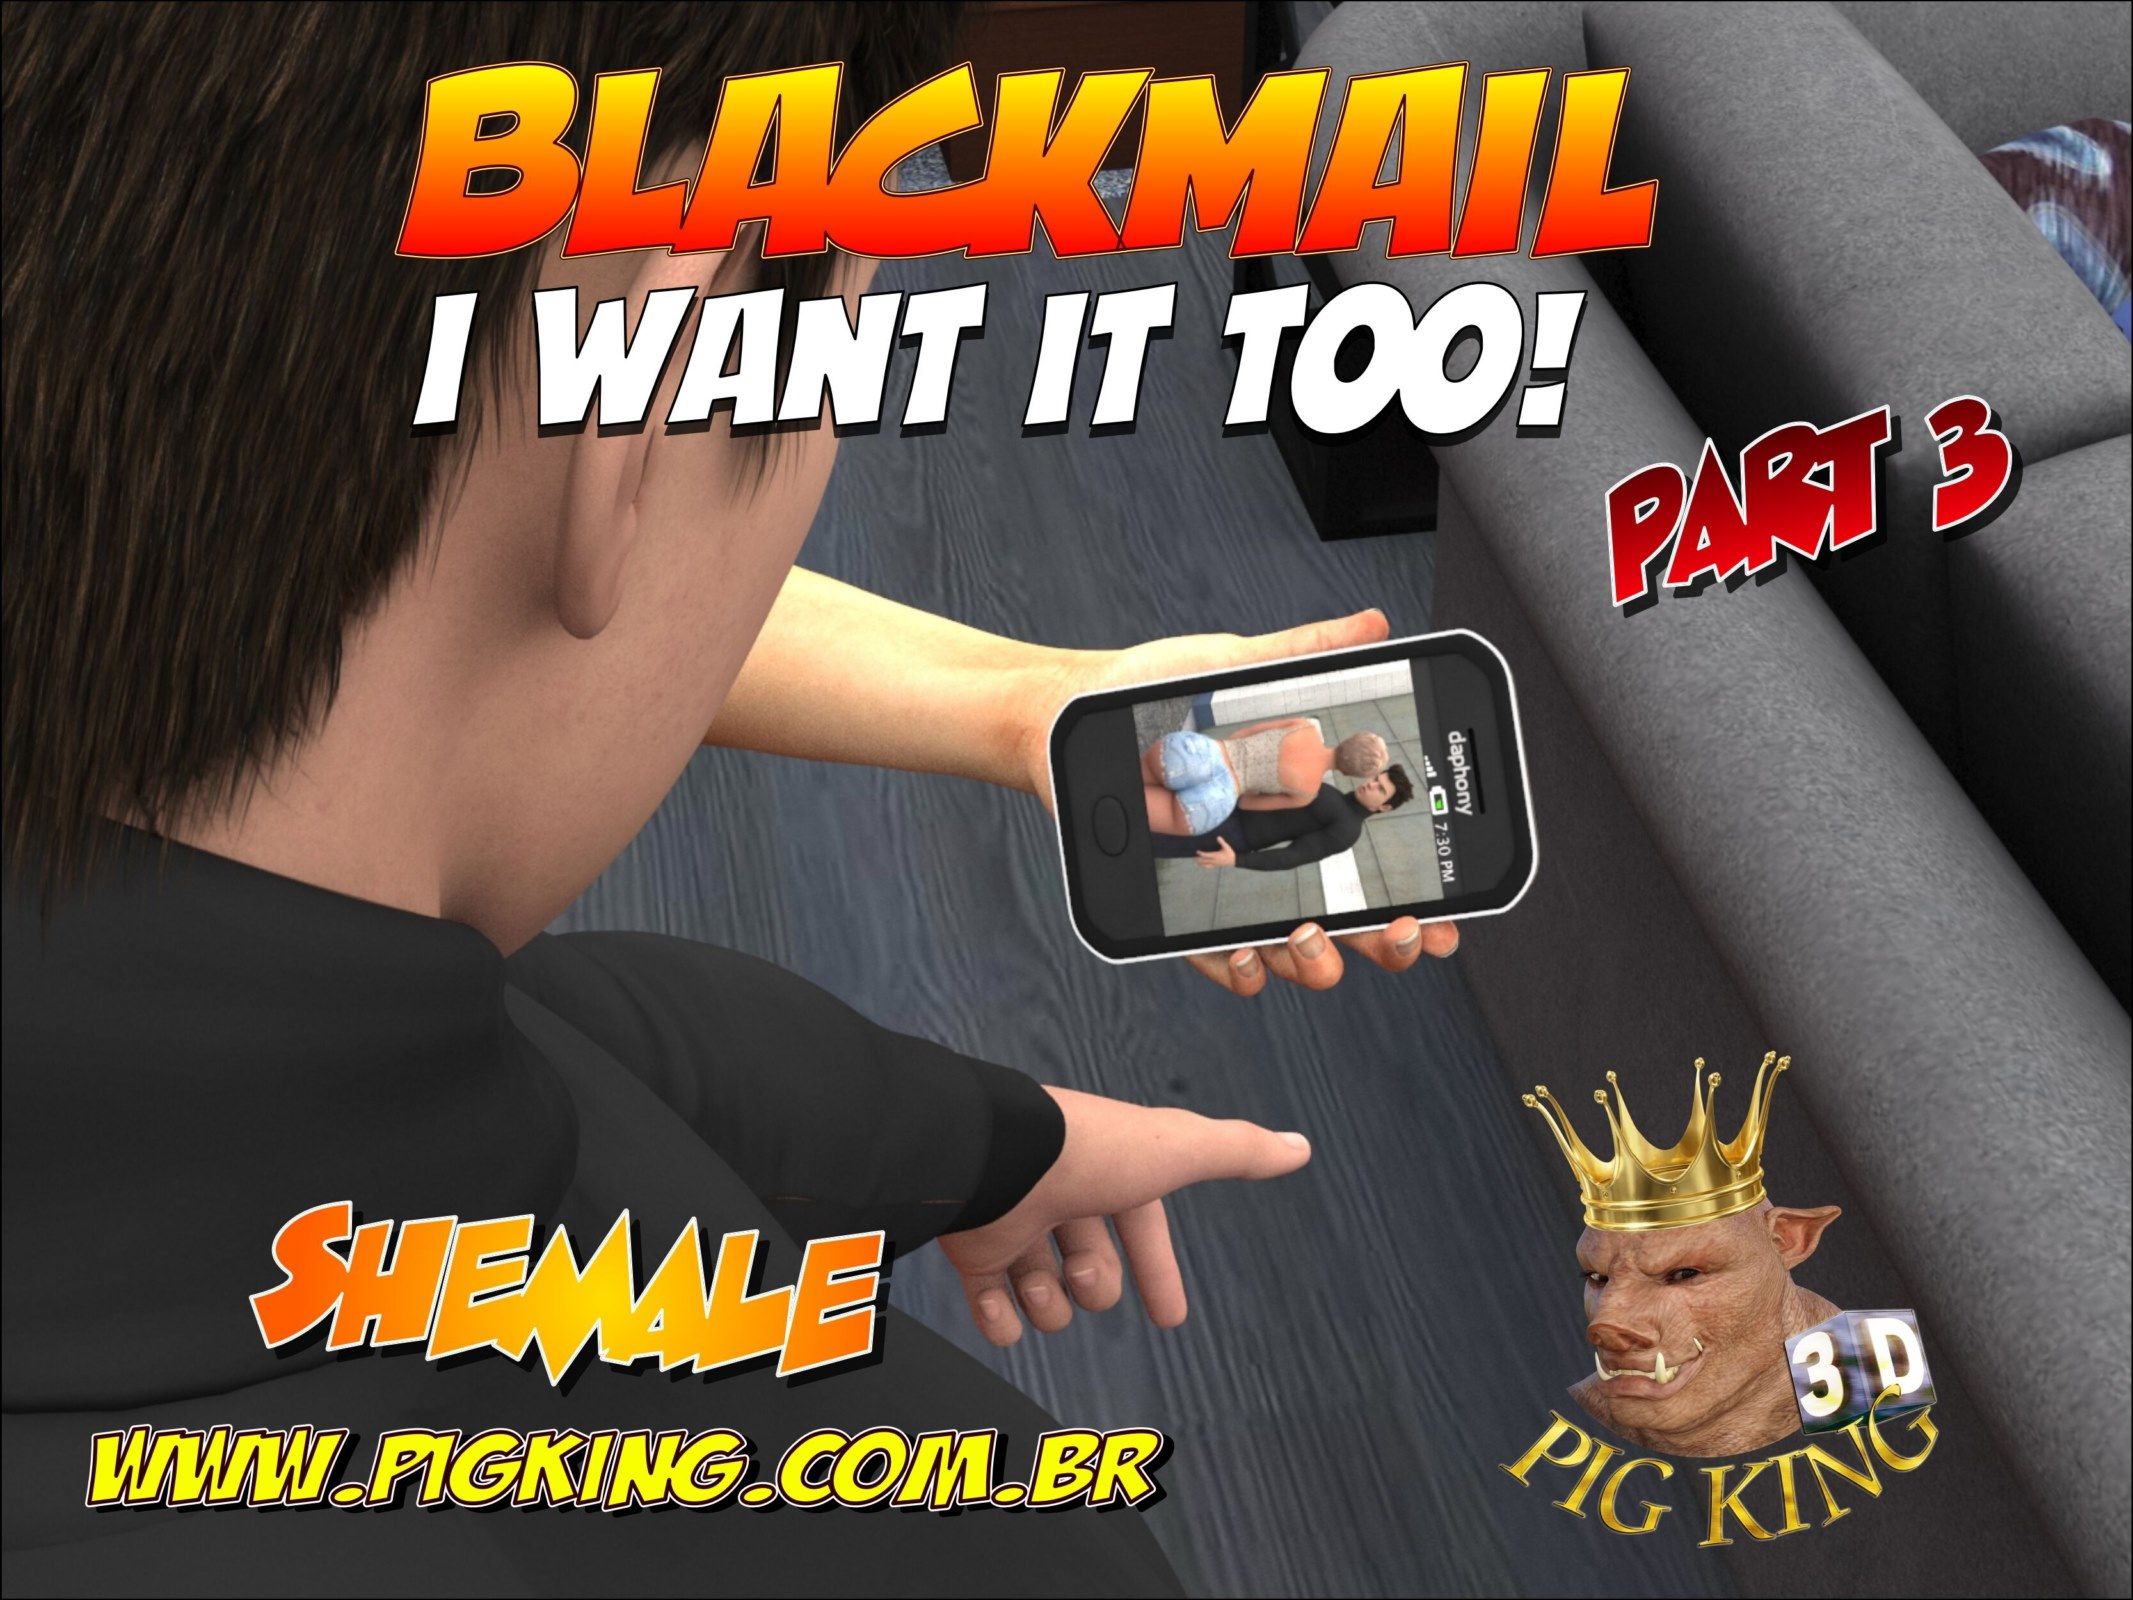 Blackmail Part 3 Want i to by Pig King page 1